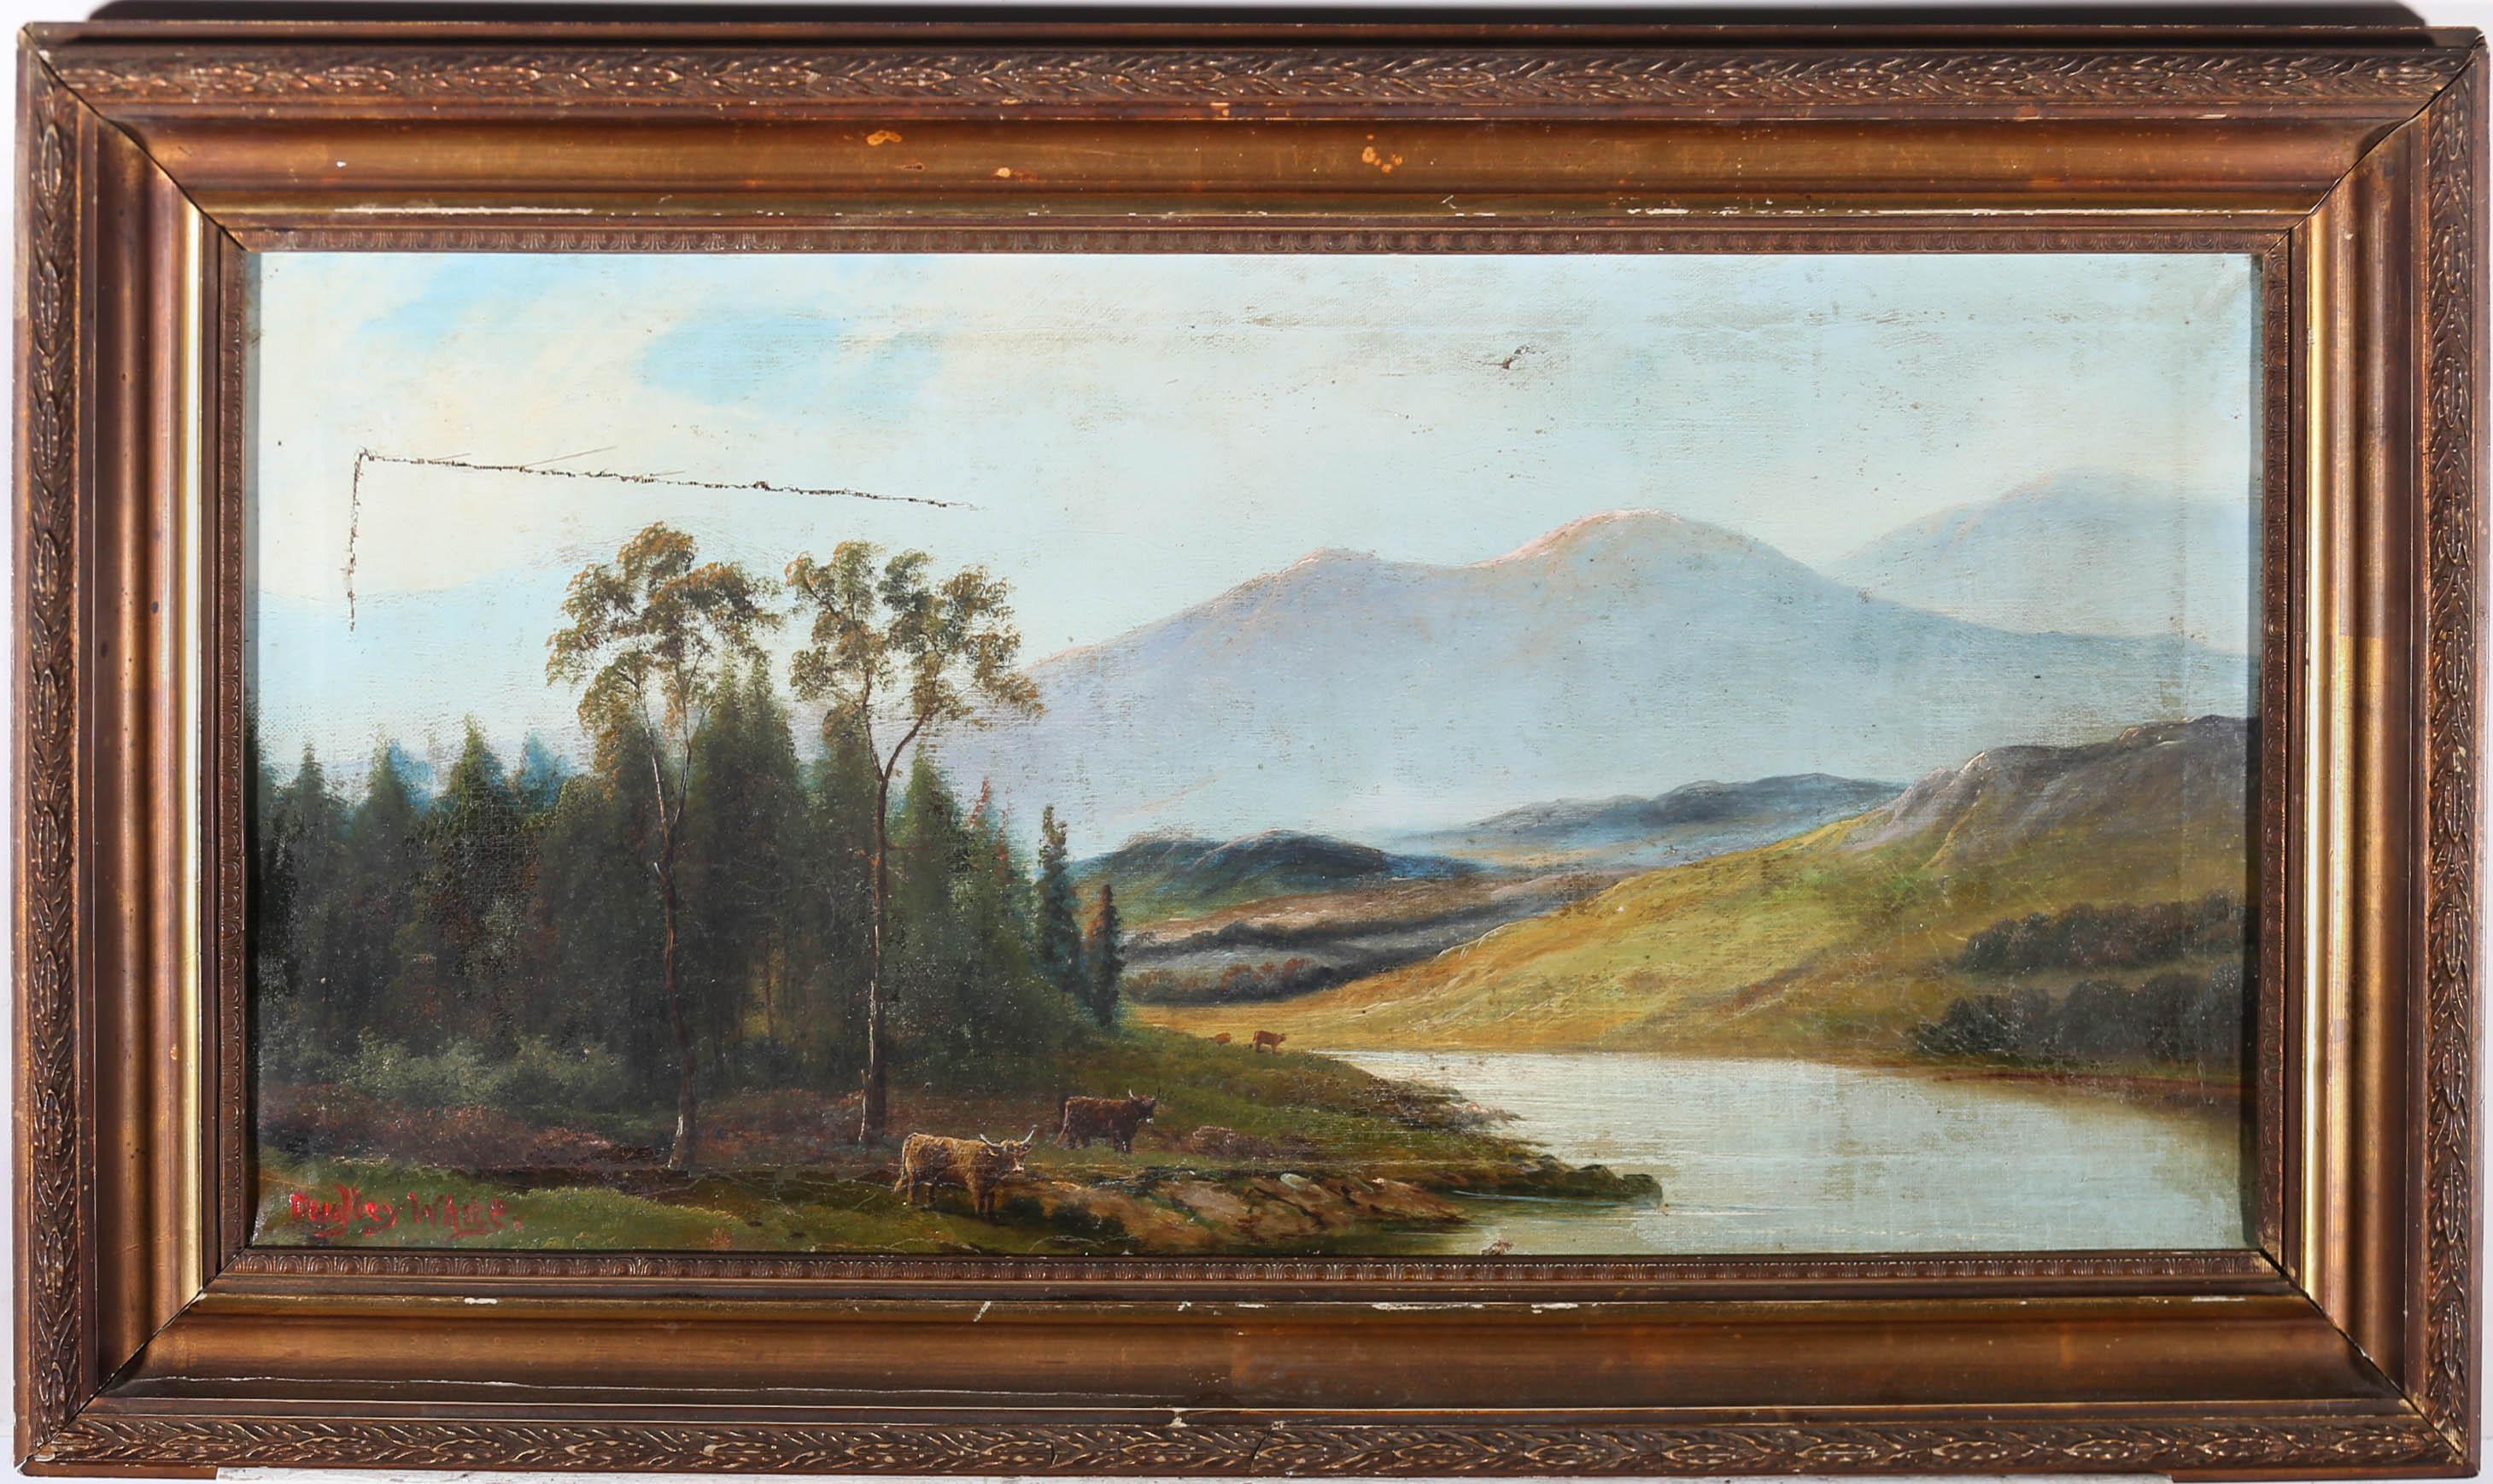 A charming oil study depicting a vast highlands landscape with cows grazing in the foreground. Signed to the lower right. Presented in a gilt frame with laurel and berry running patterns. On canvas.